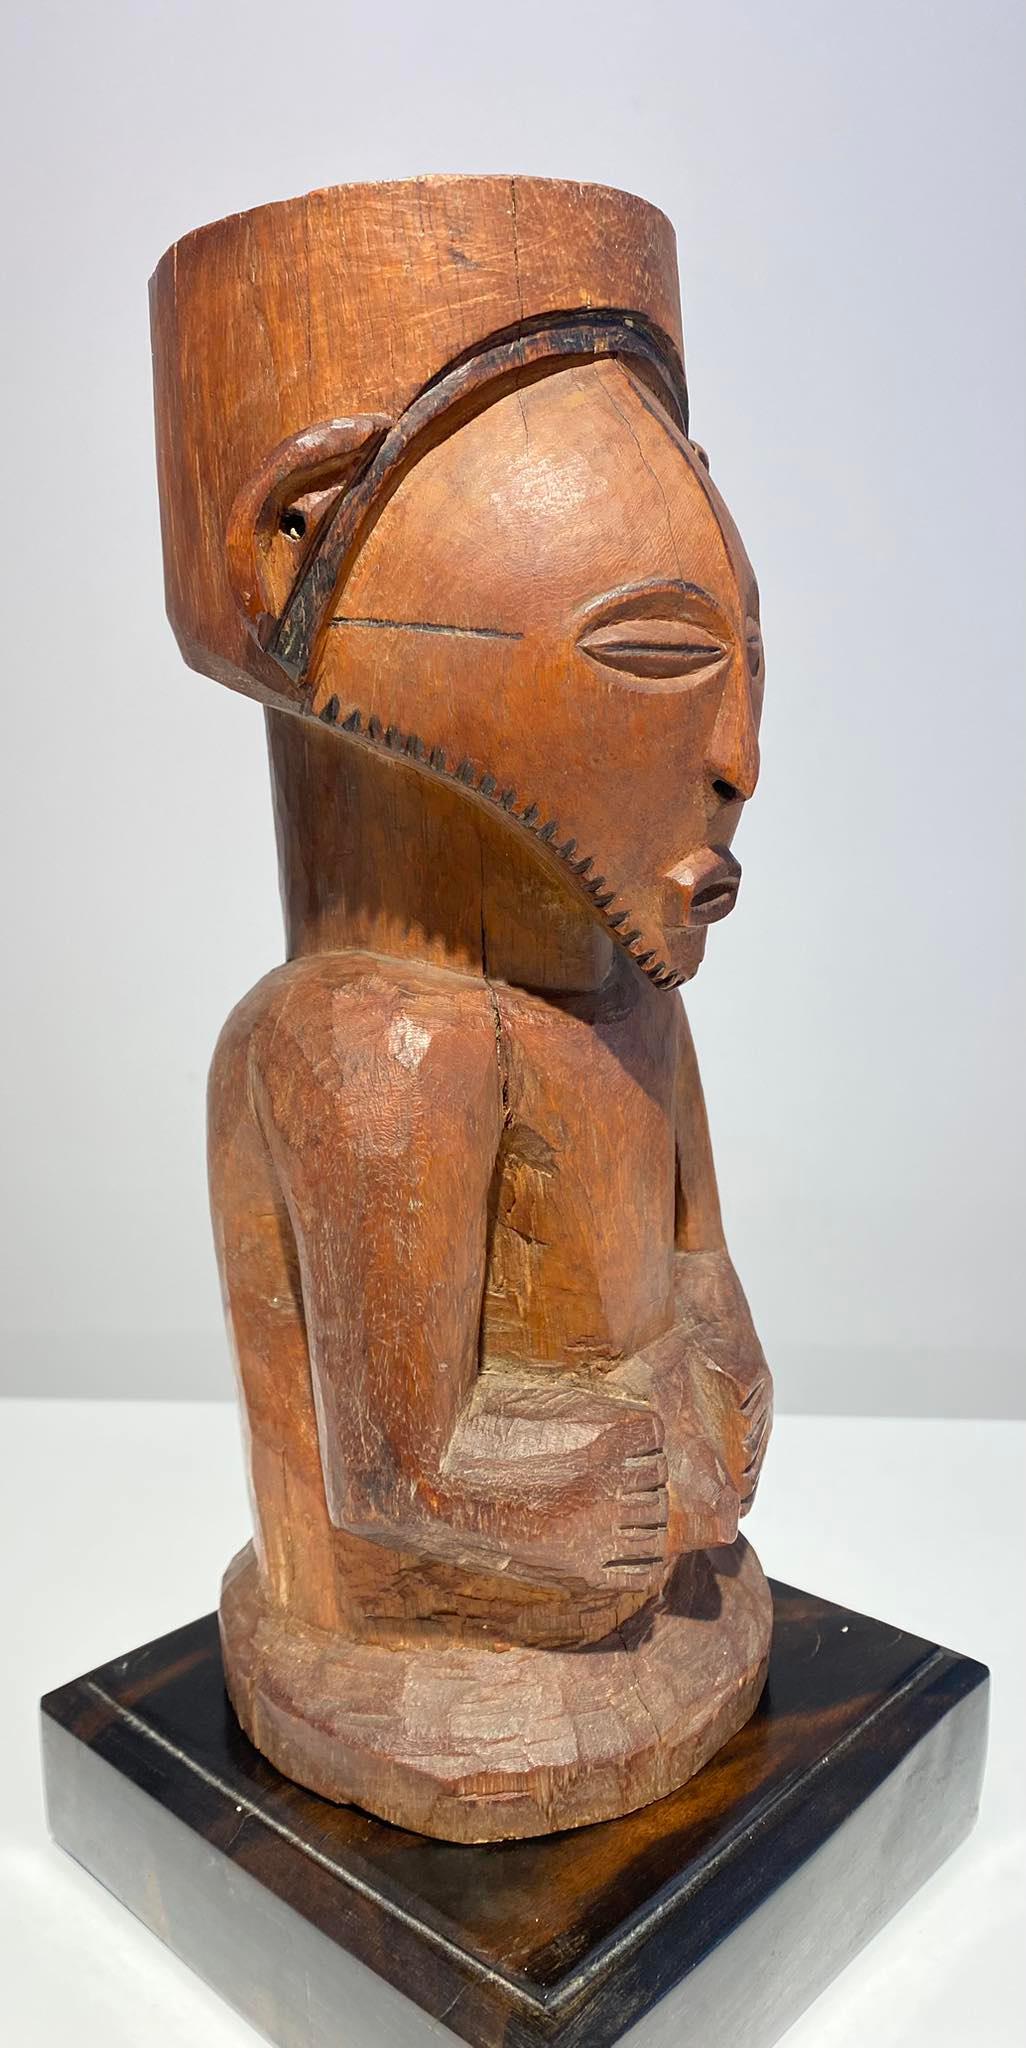 20th Century Kusu wooden ancestor fetish ca 1900 DR Congo Africa Central African Tribal Art For Sale